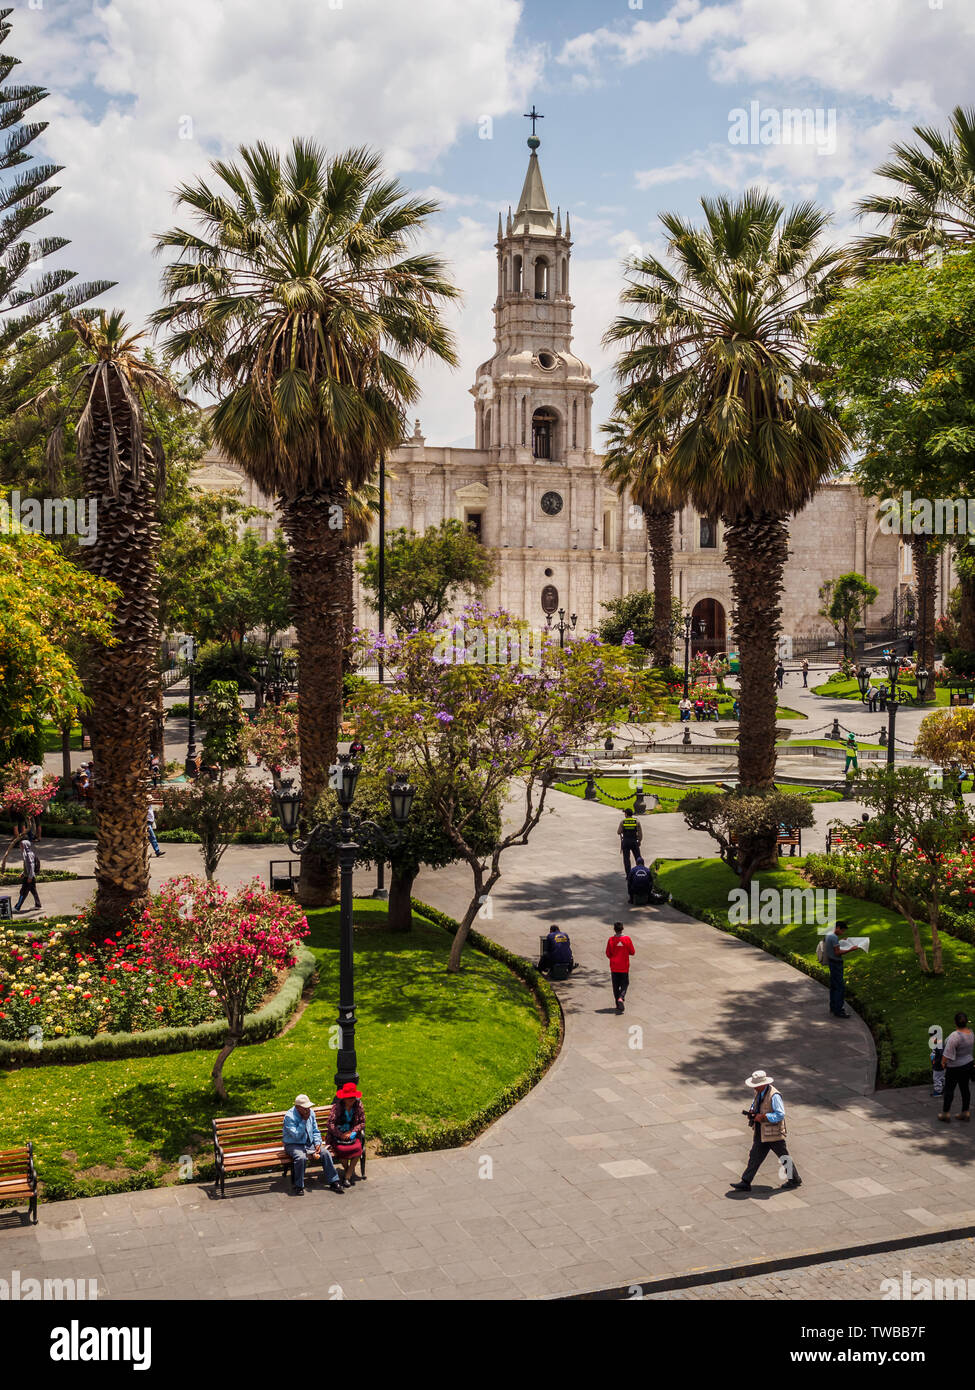 Plaza de armas of the city of Arequipa in southern Peru. The cathedral and palm trees Stock Photo